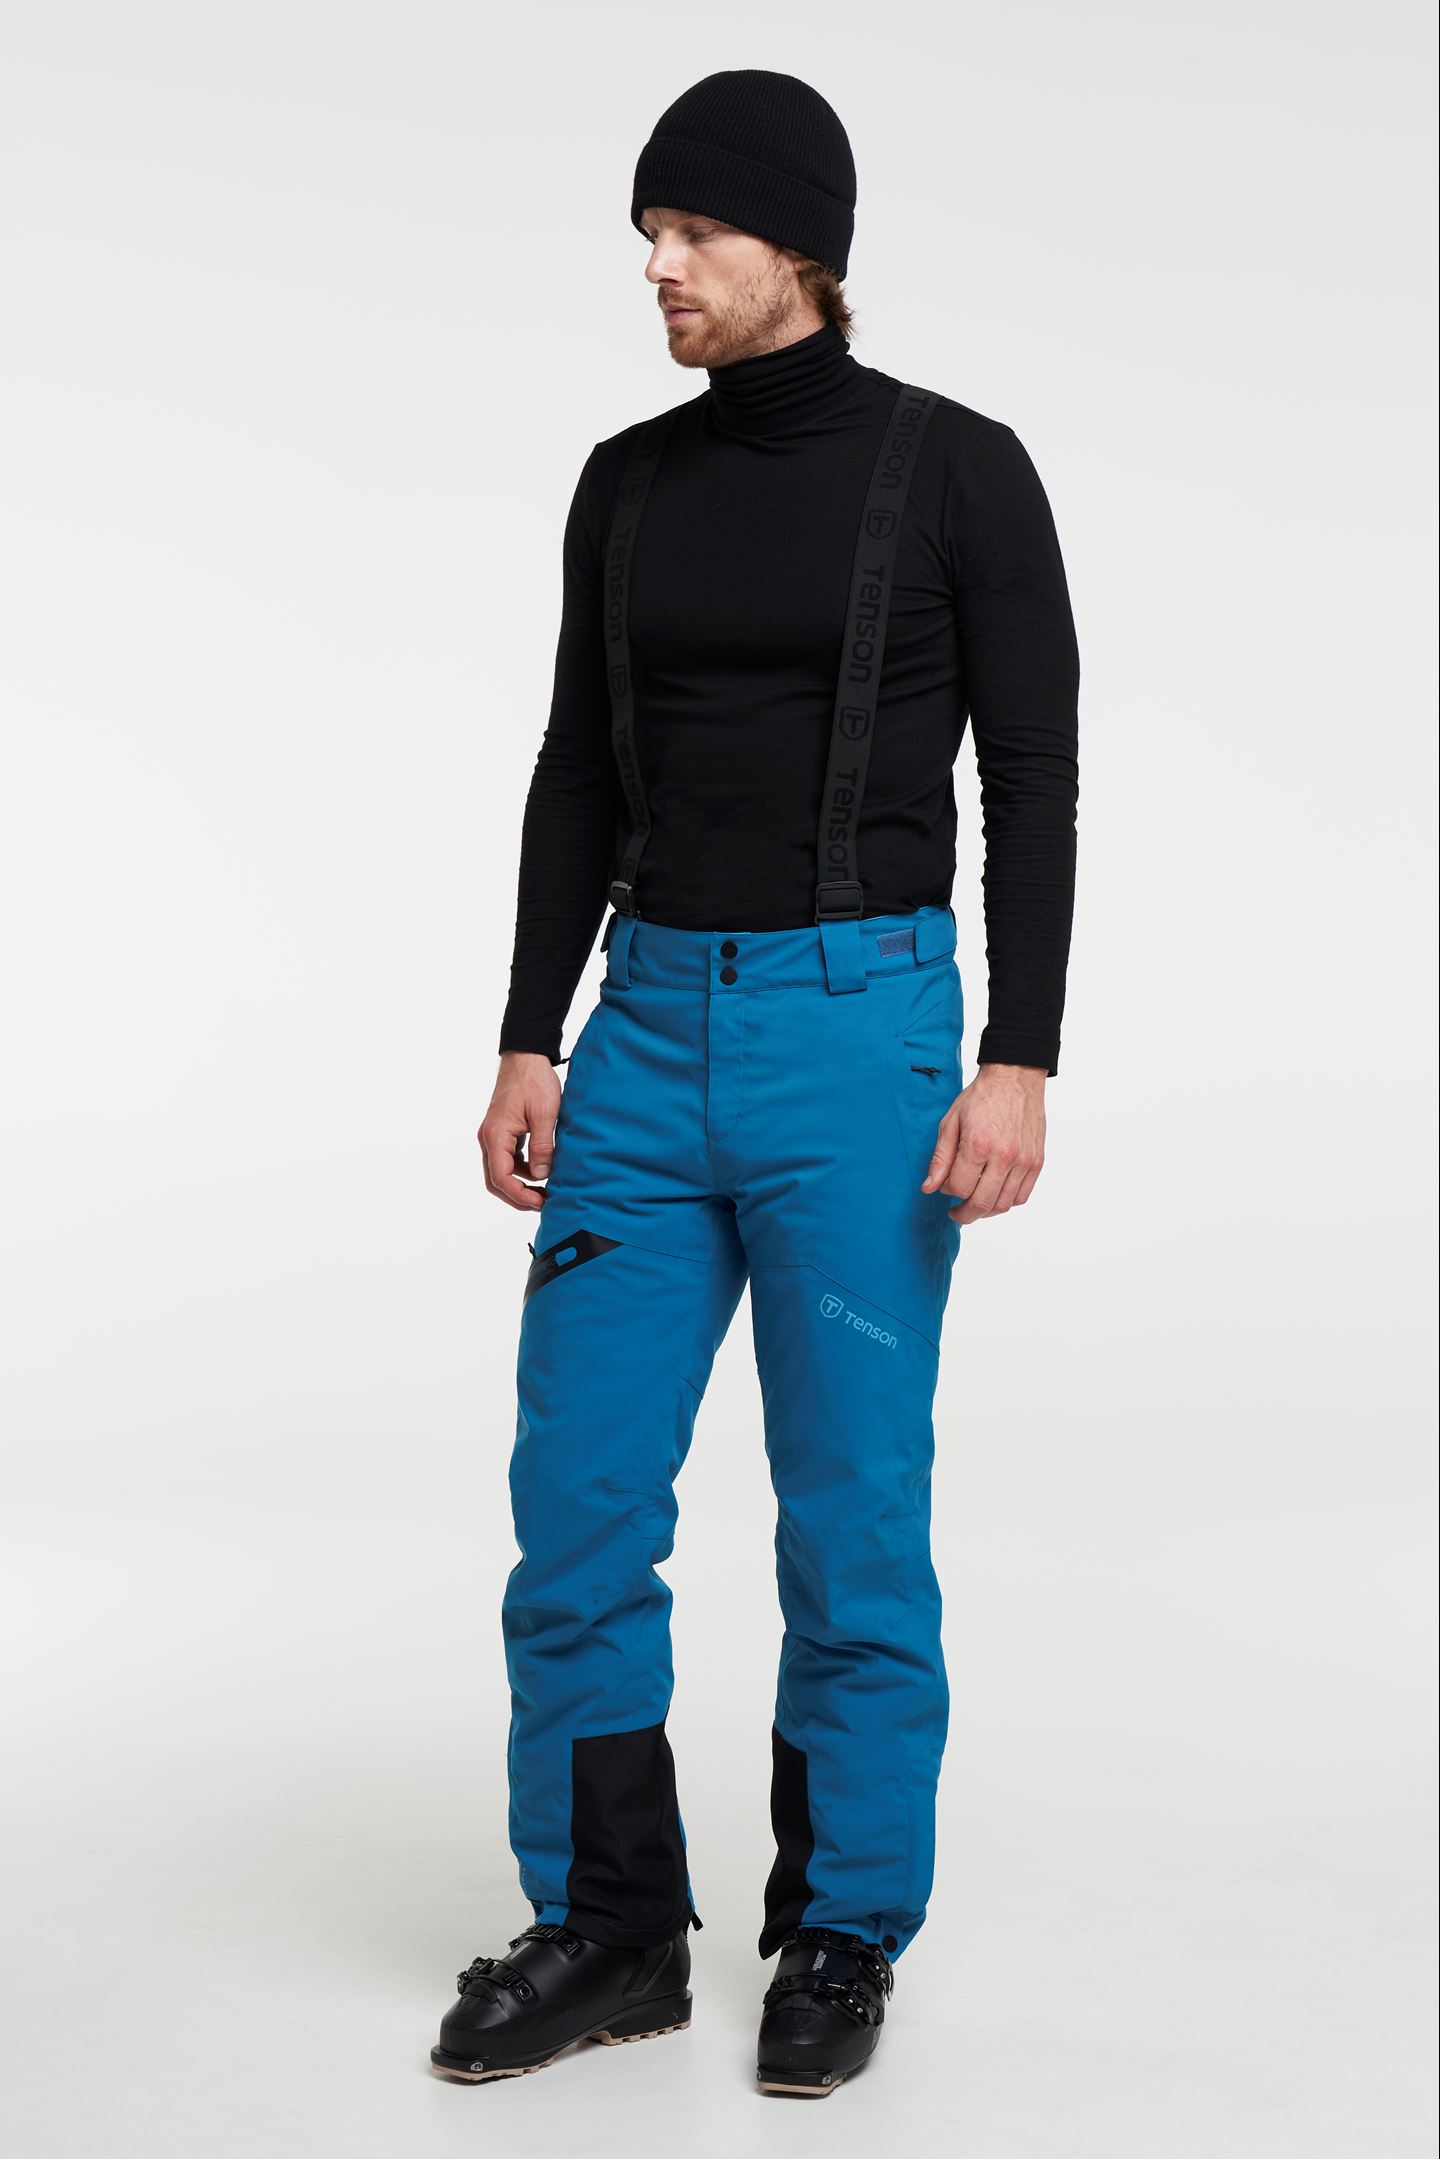 intellectueel essay Korst Core Ski Pants - Ski Trousers with Removable Braces - Turquoise